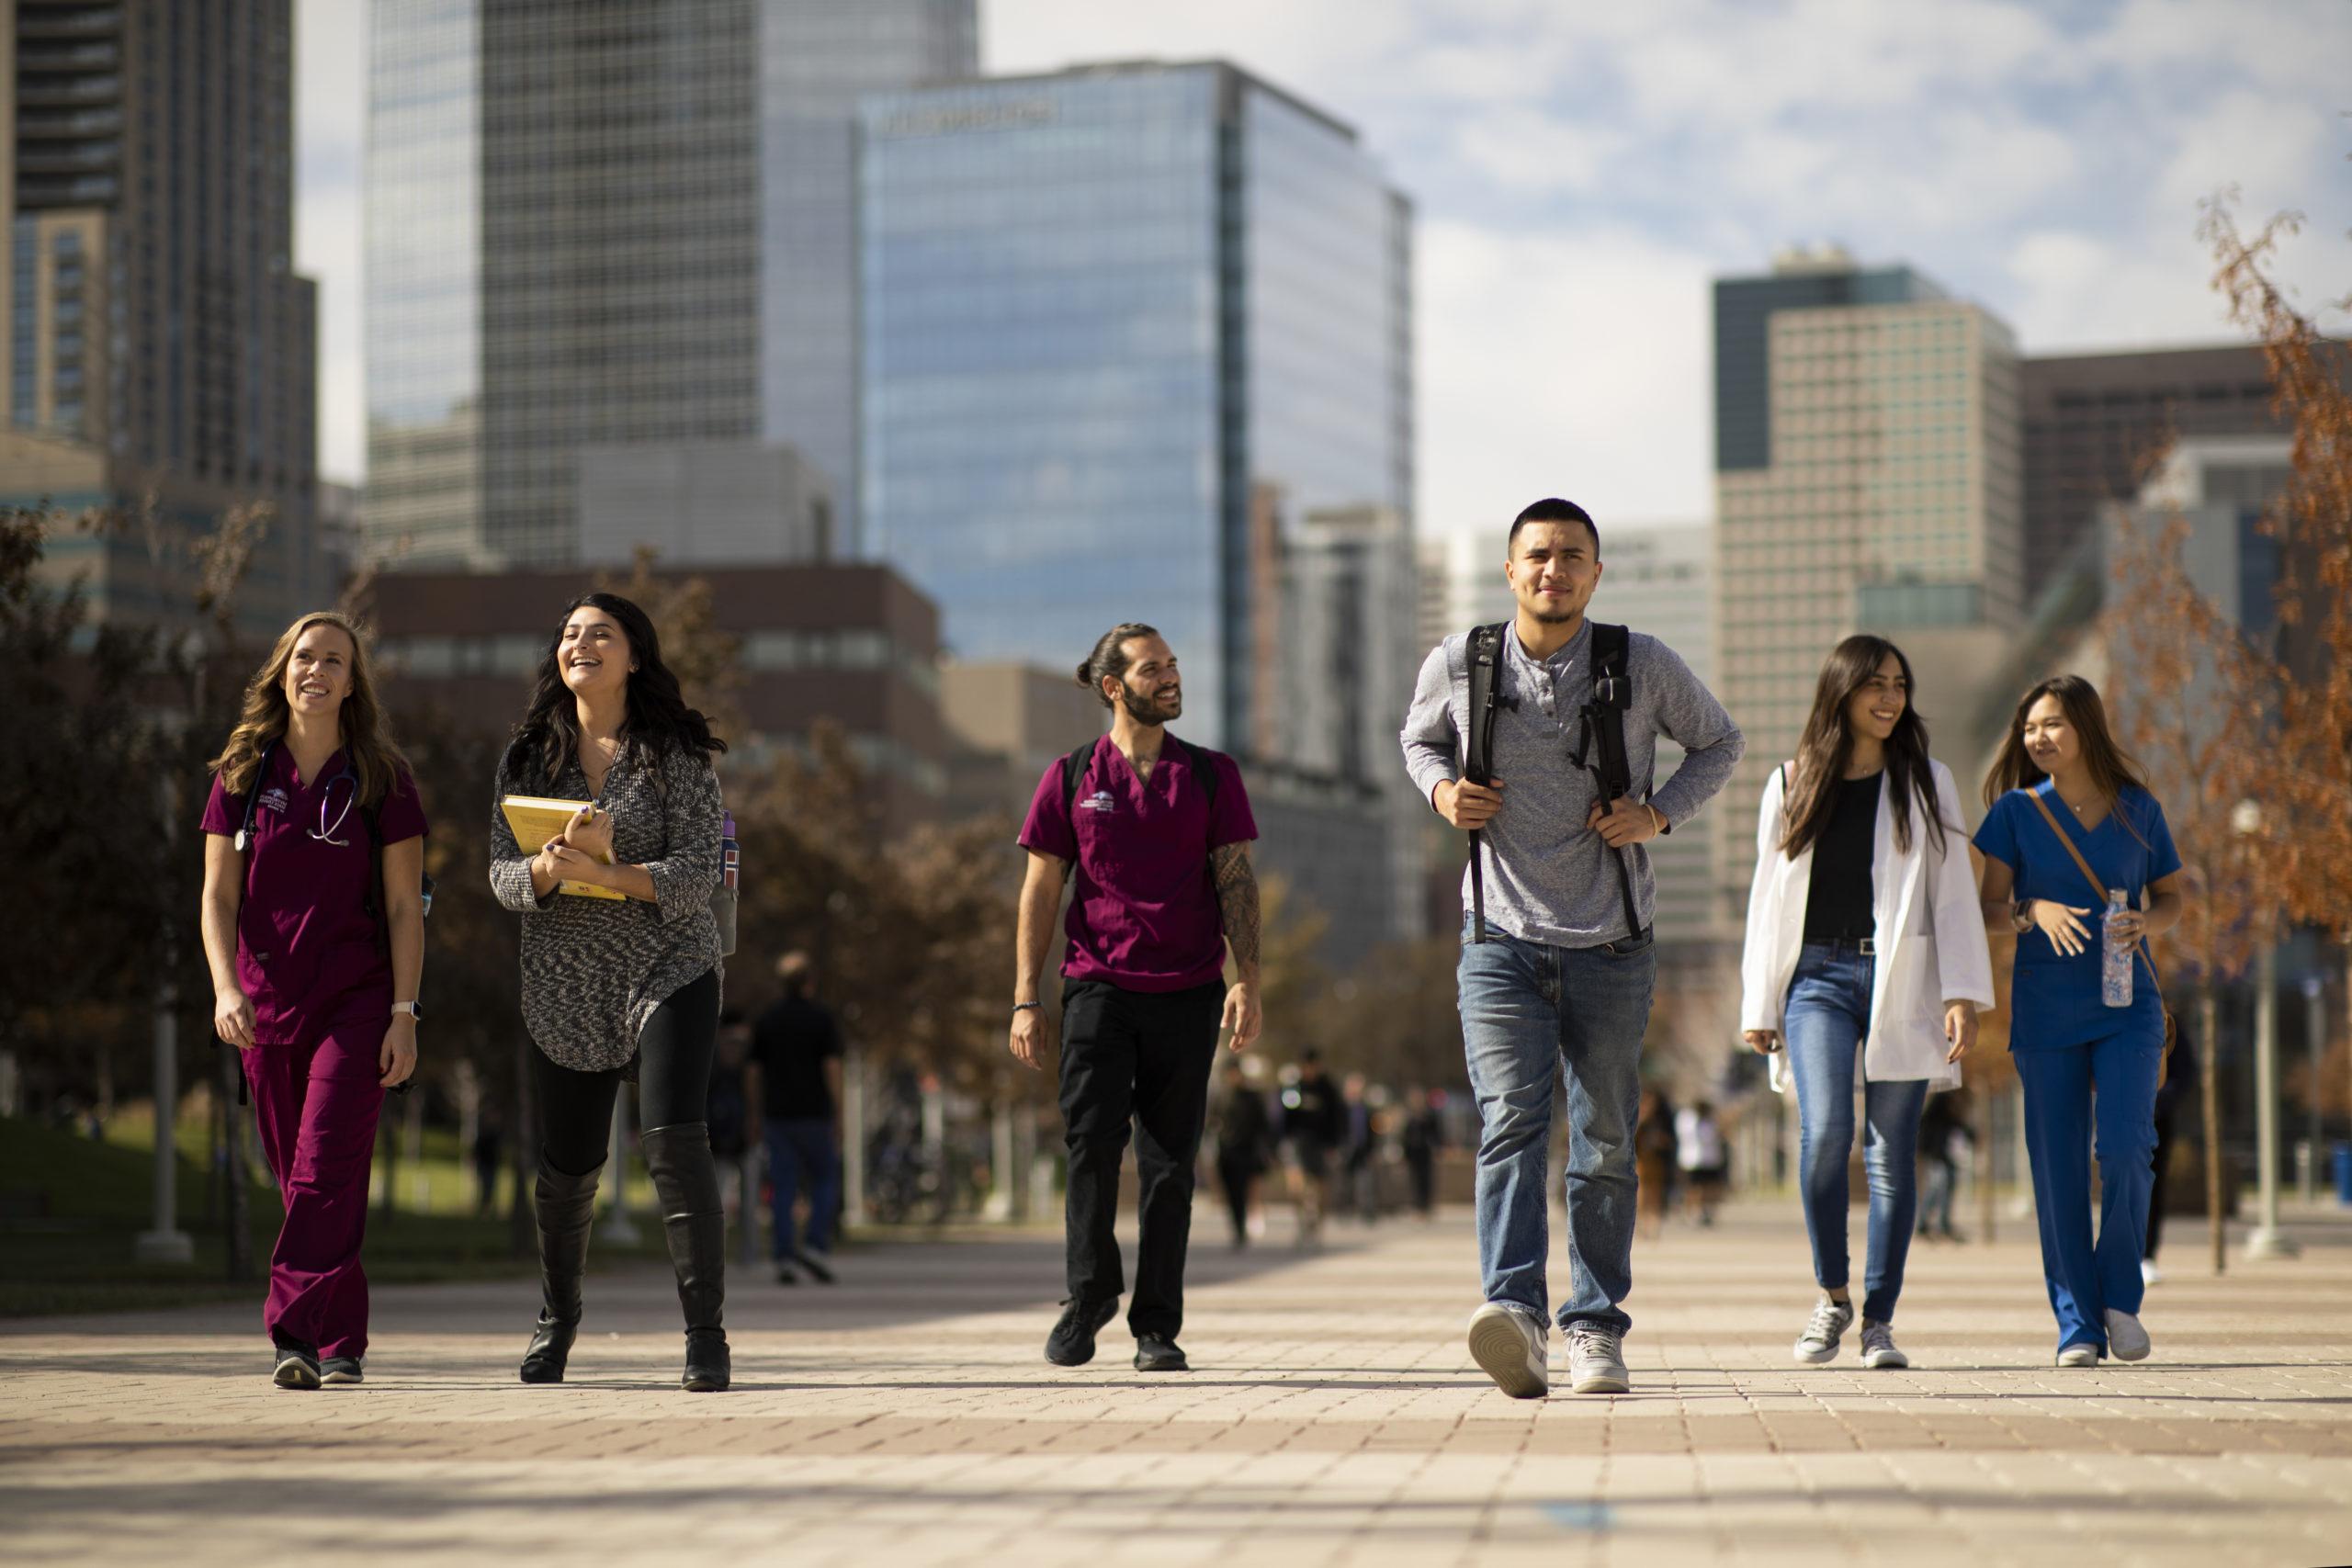 Group of students walking through campus with downtown Denver in the background.